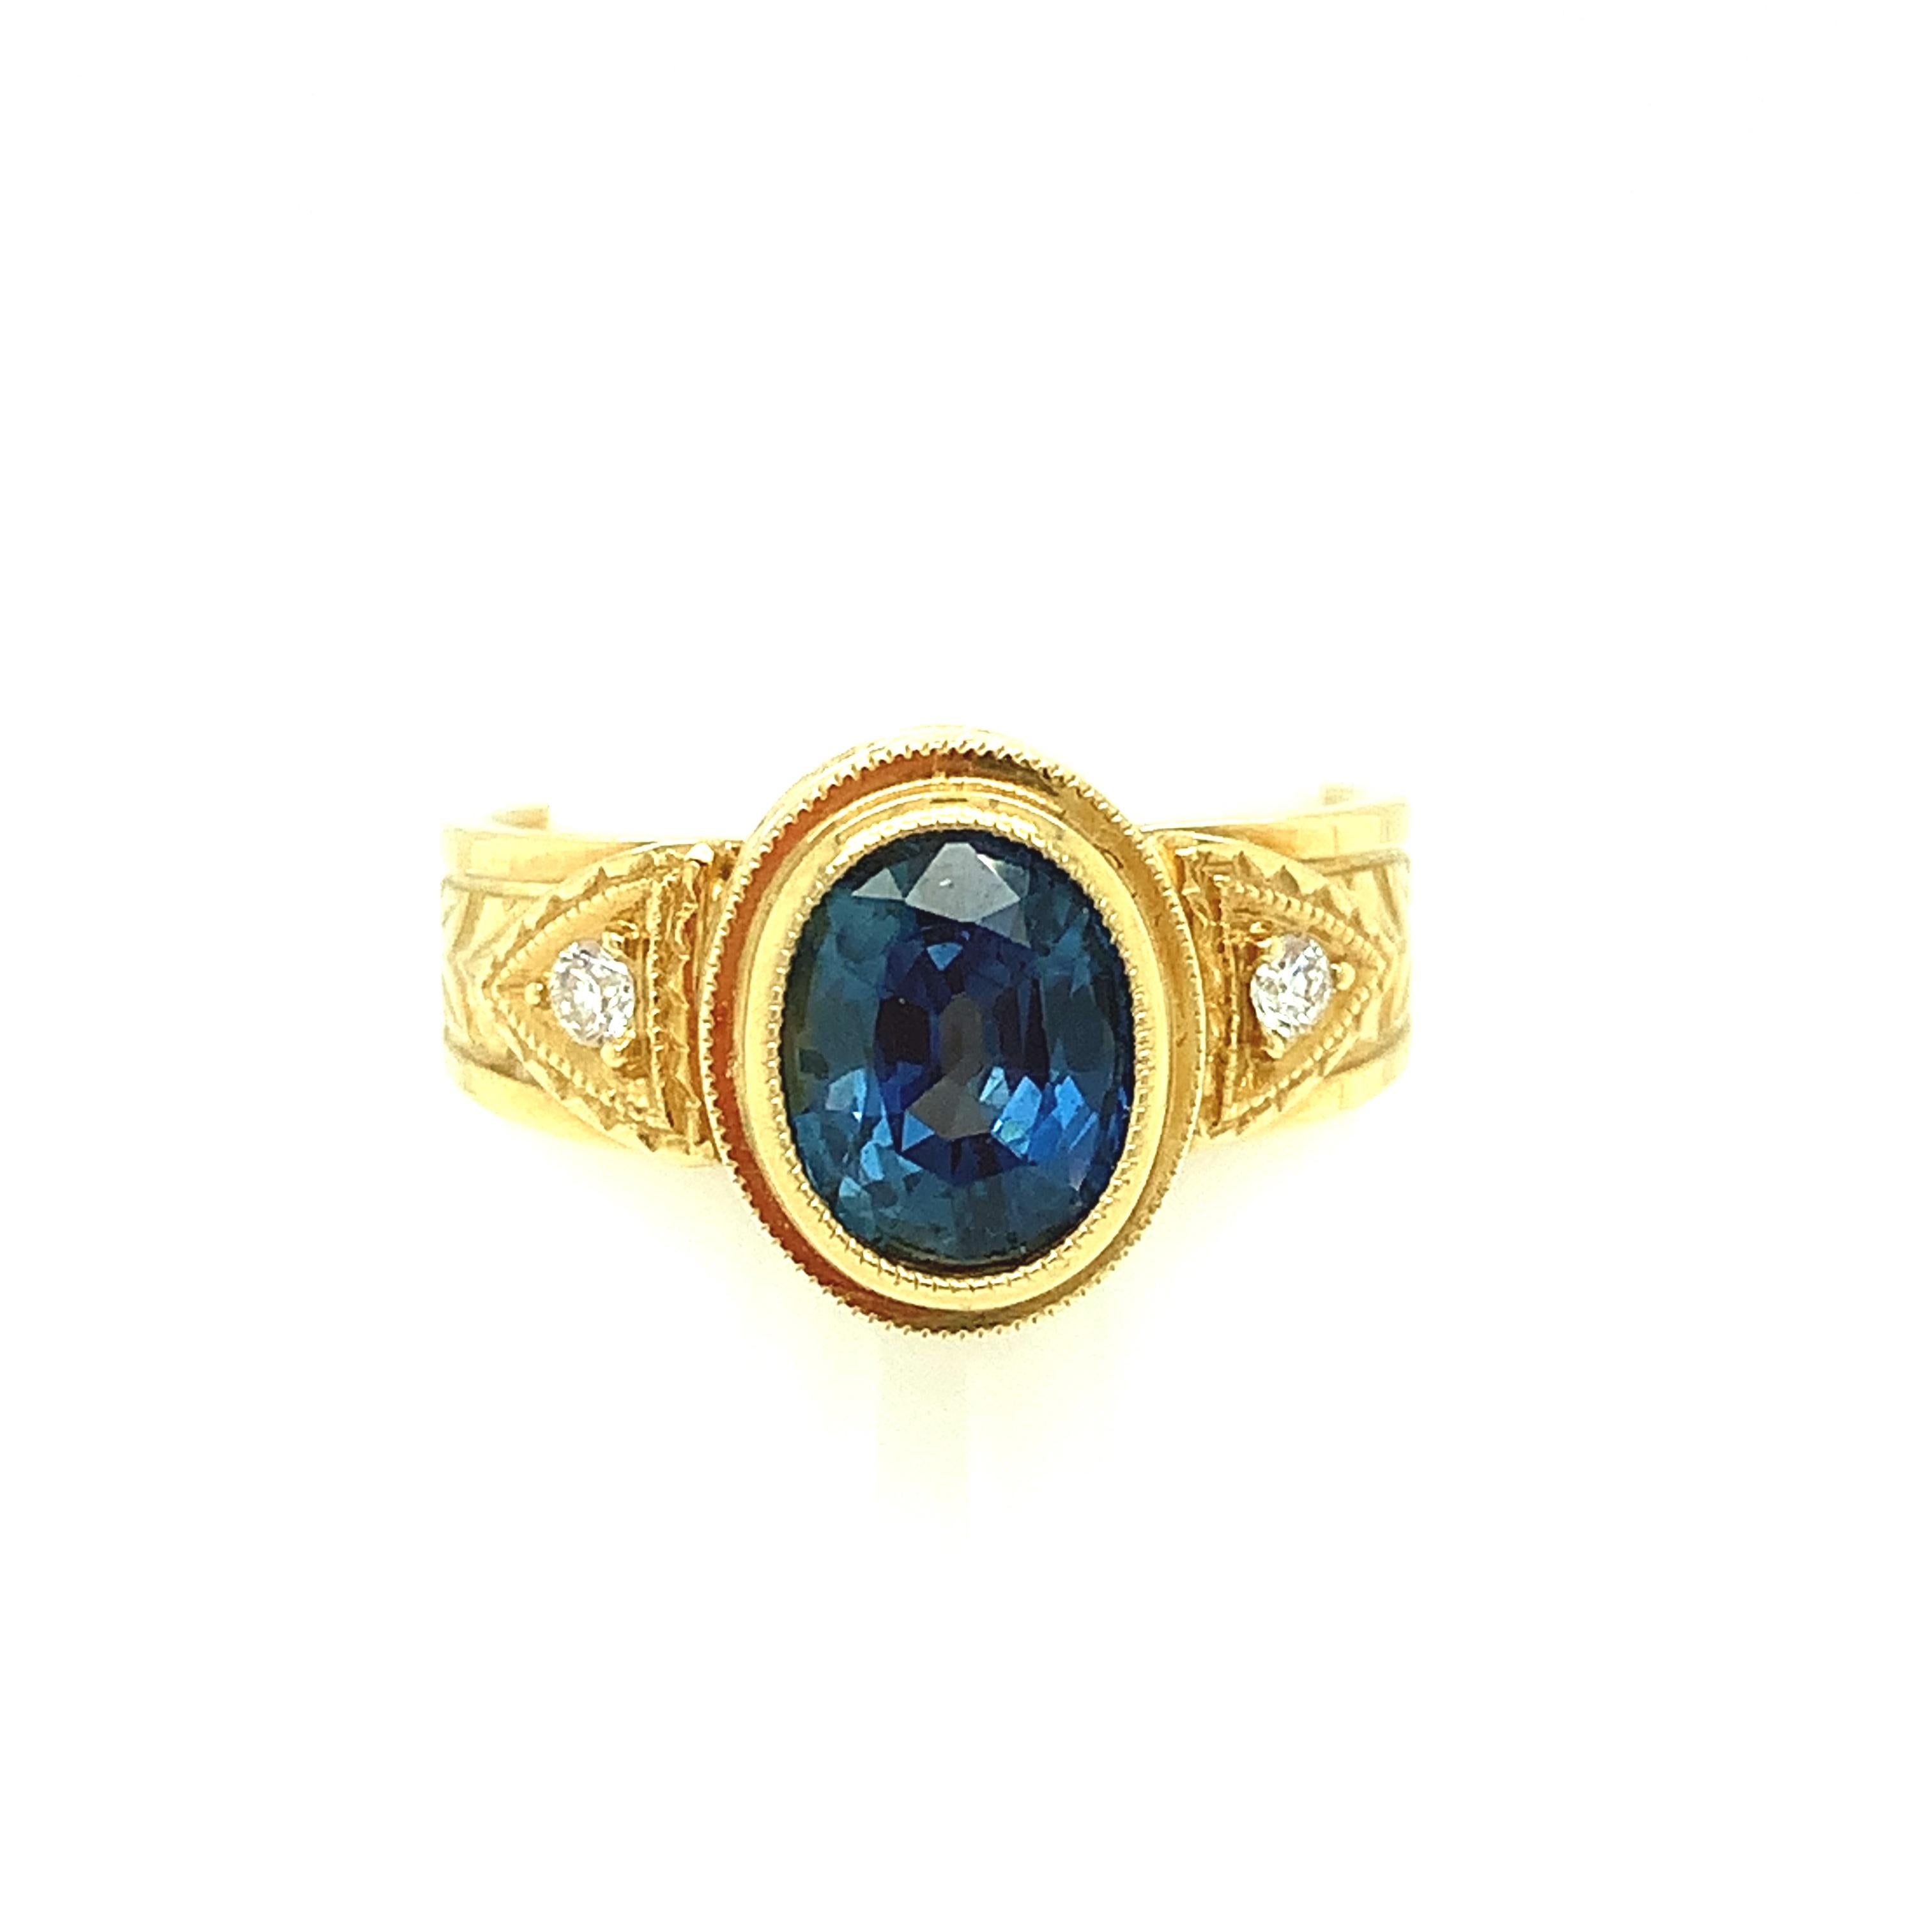 A lively, bright navy blue sapphire weighing 1.68 carats is featured in this 18k yellow gold handmade ring. This ring is part of our signature collection designed to showcase a central gemstone in a beautifully engraved handmade bezel accented with